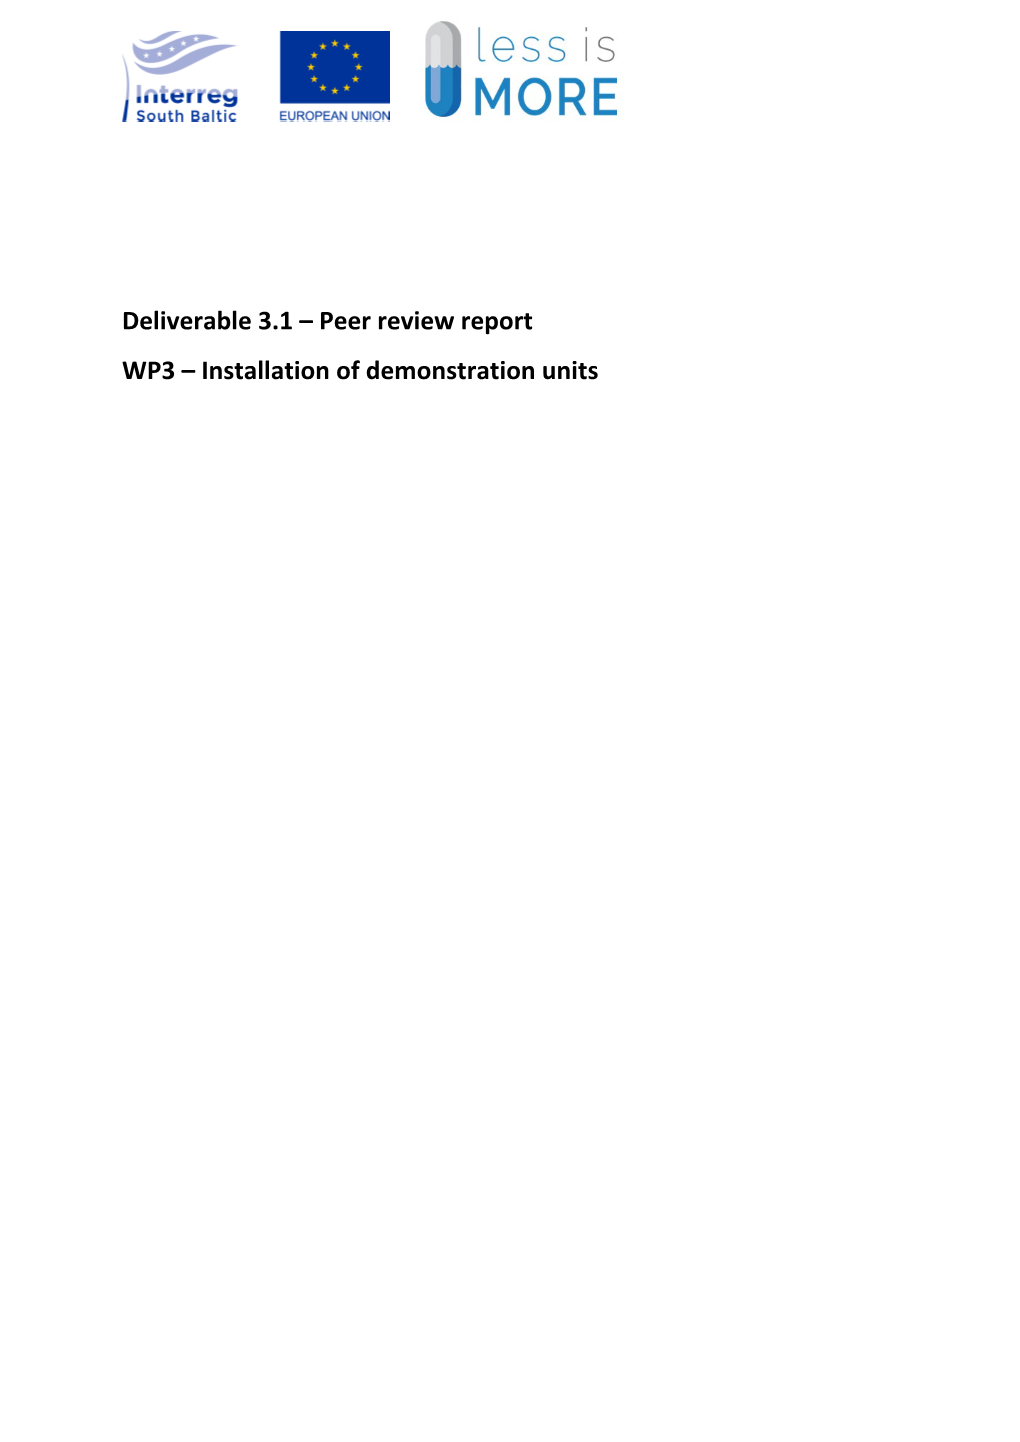 Peer Review Report WP3 – Installation of Demonstration Units